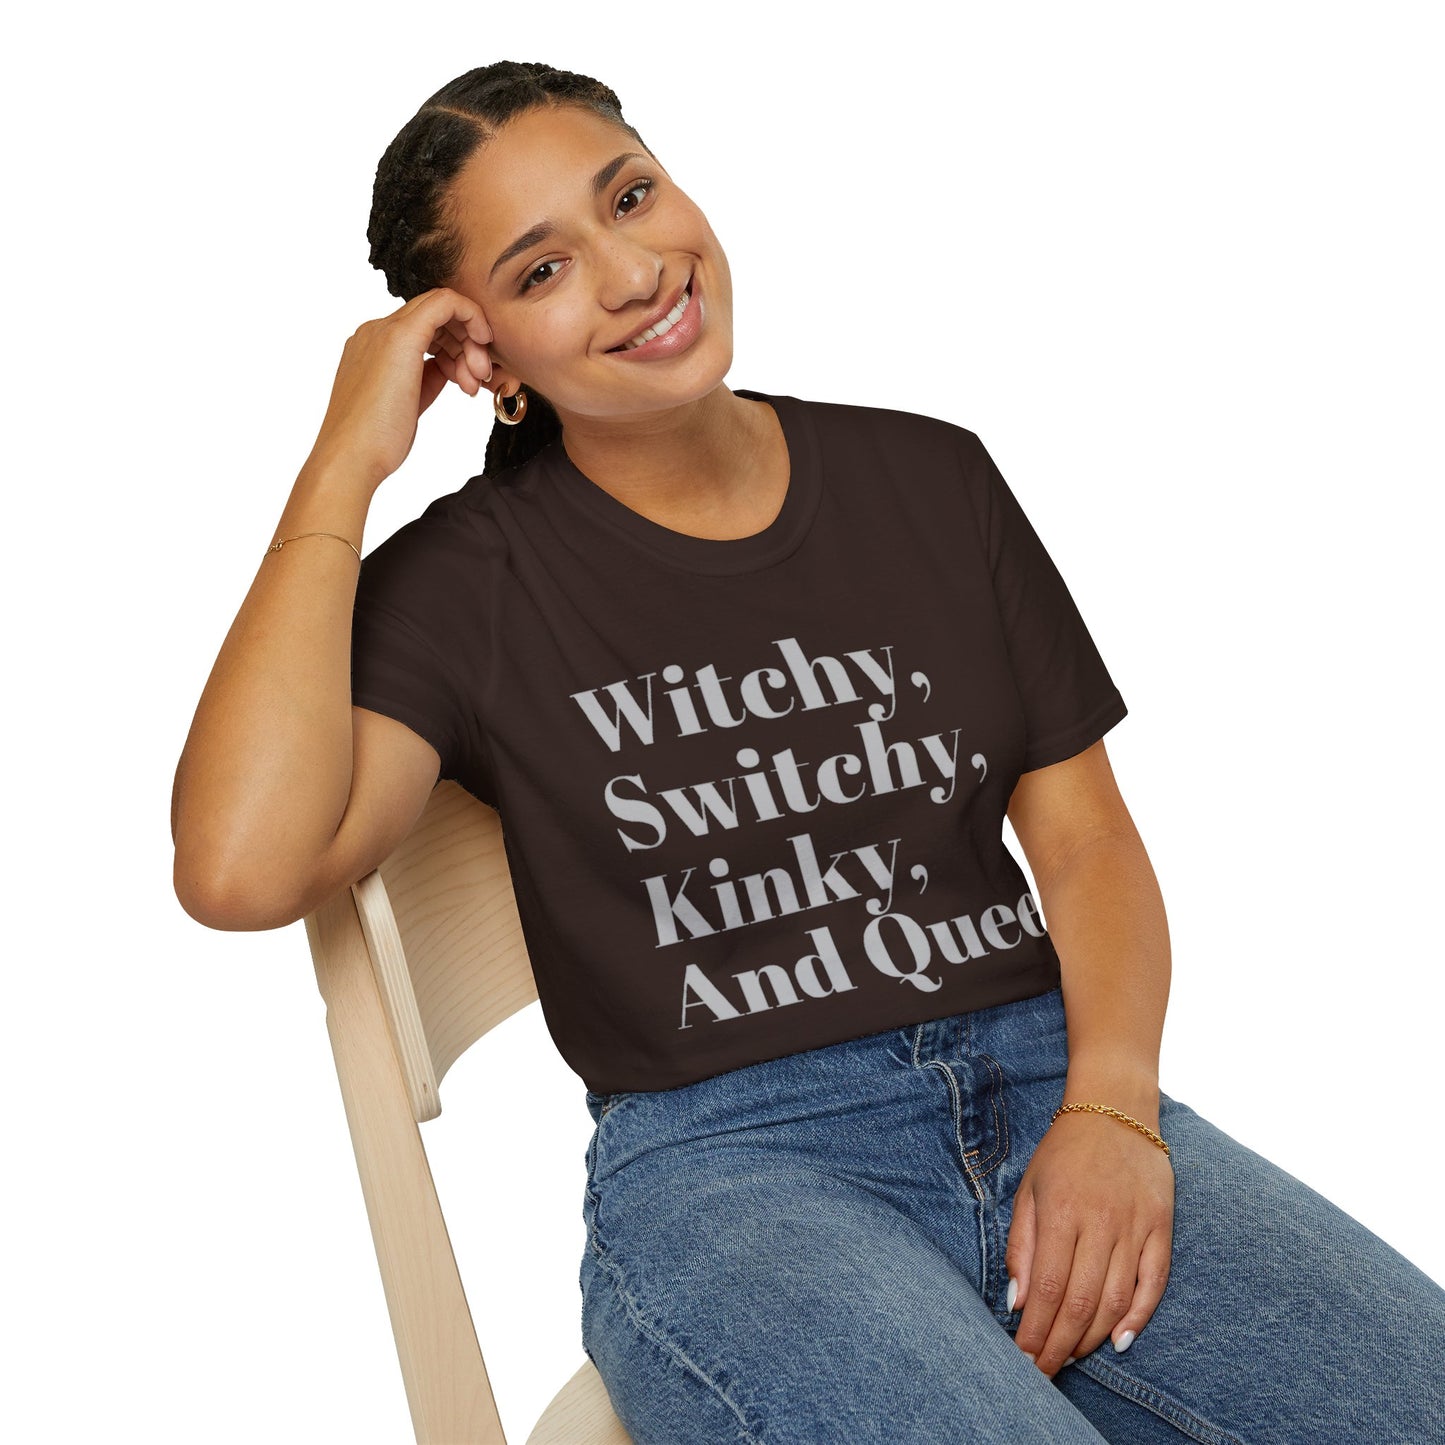 Witchy, Switchy, Kinky, and Queer Unisex Softstyle T-Shirt